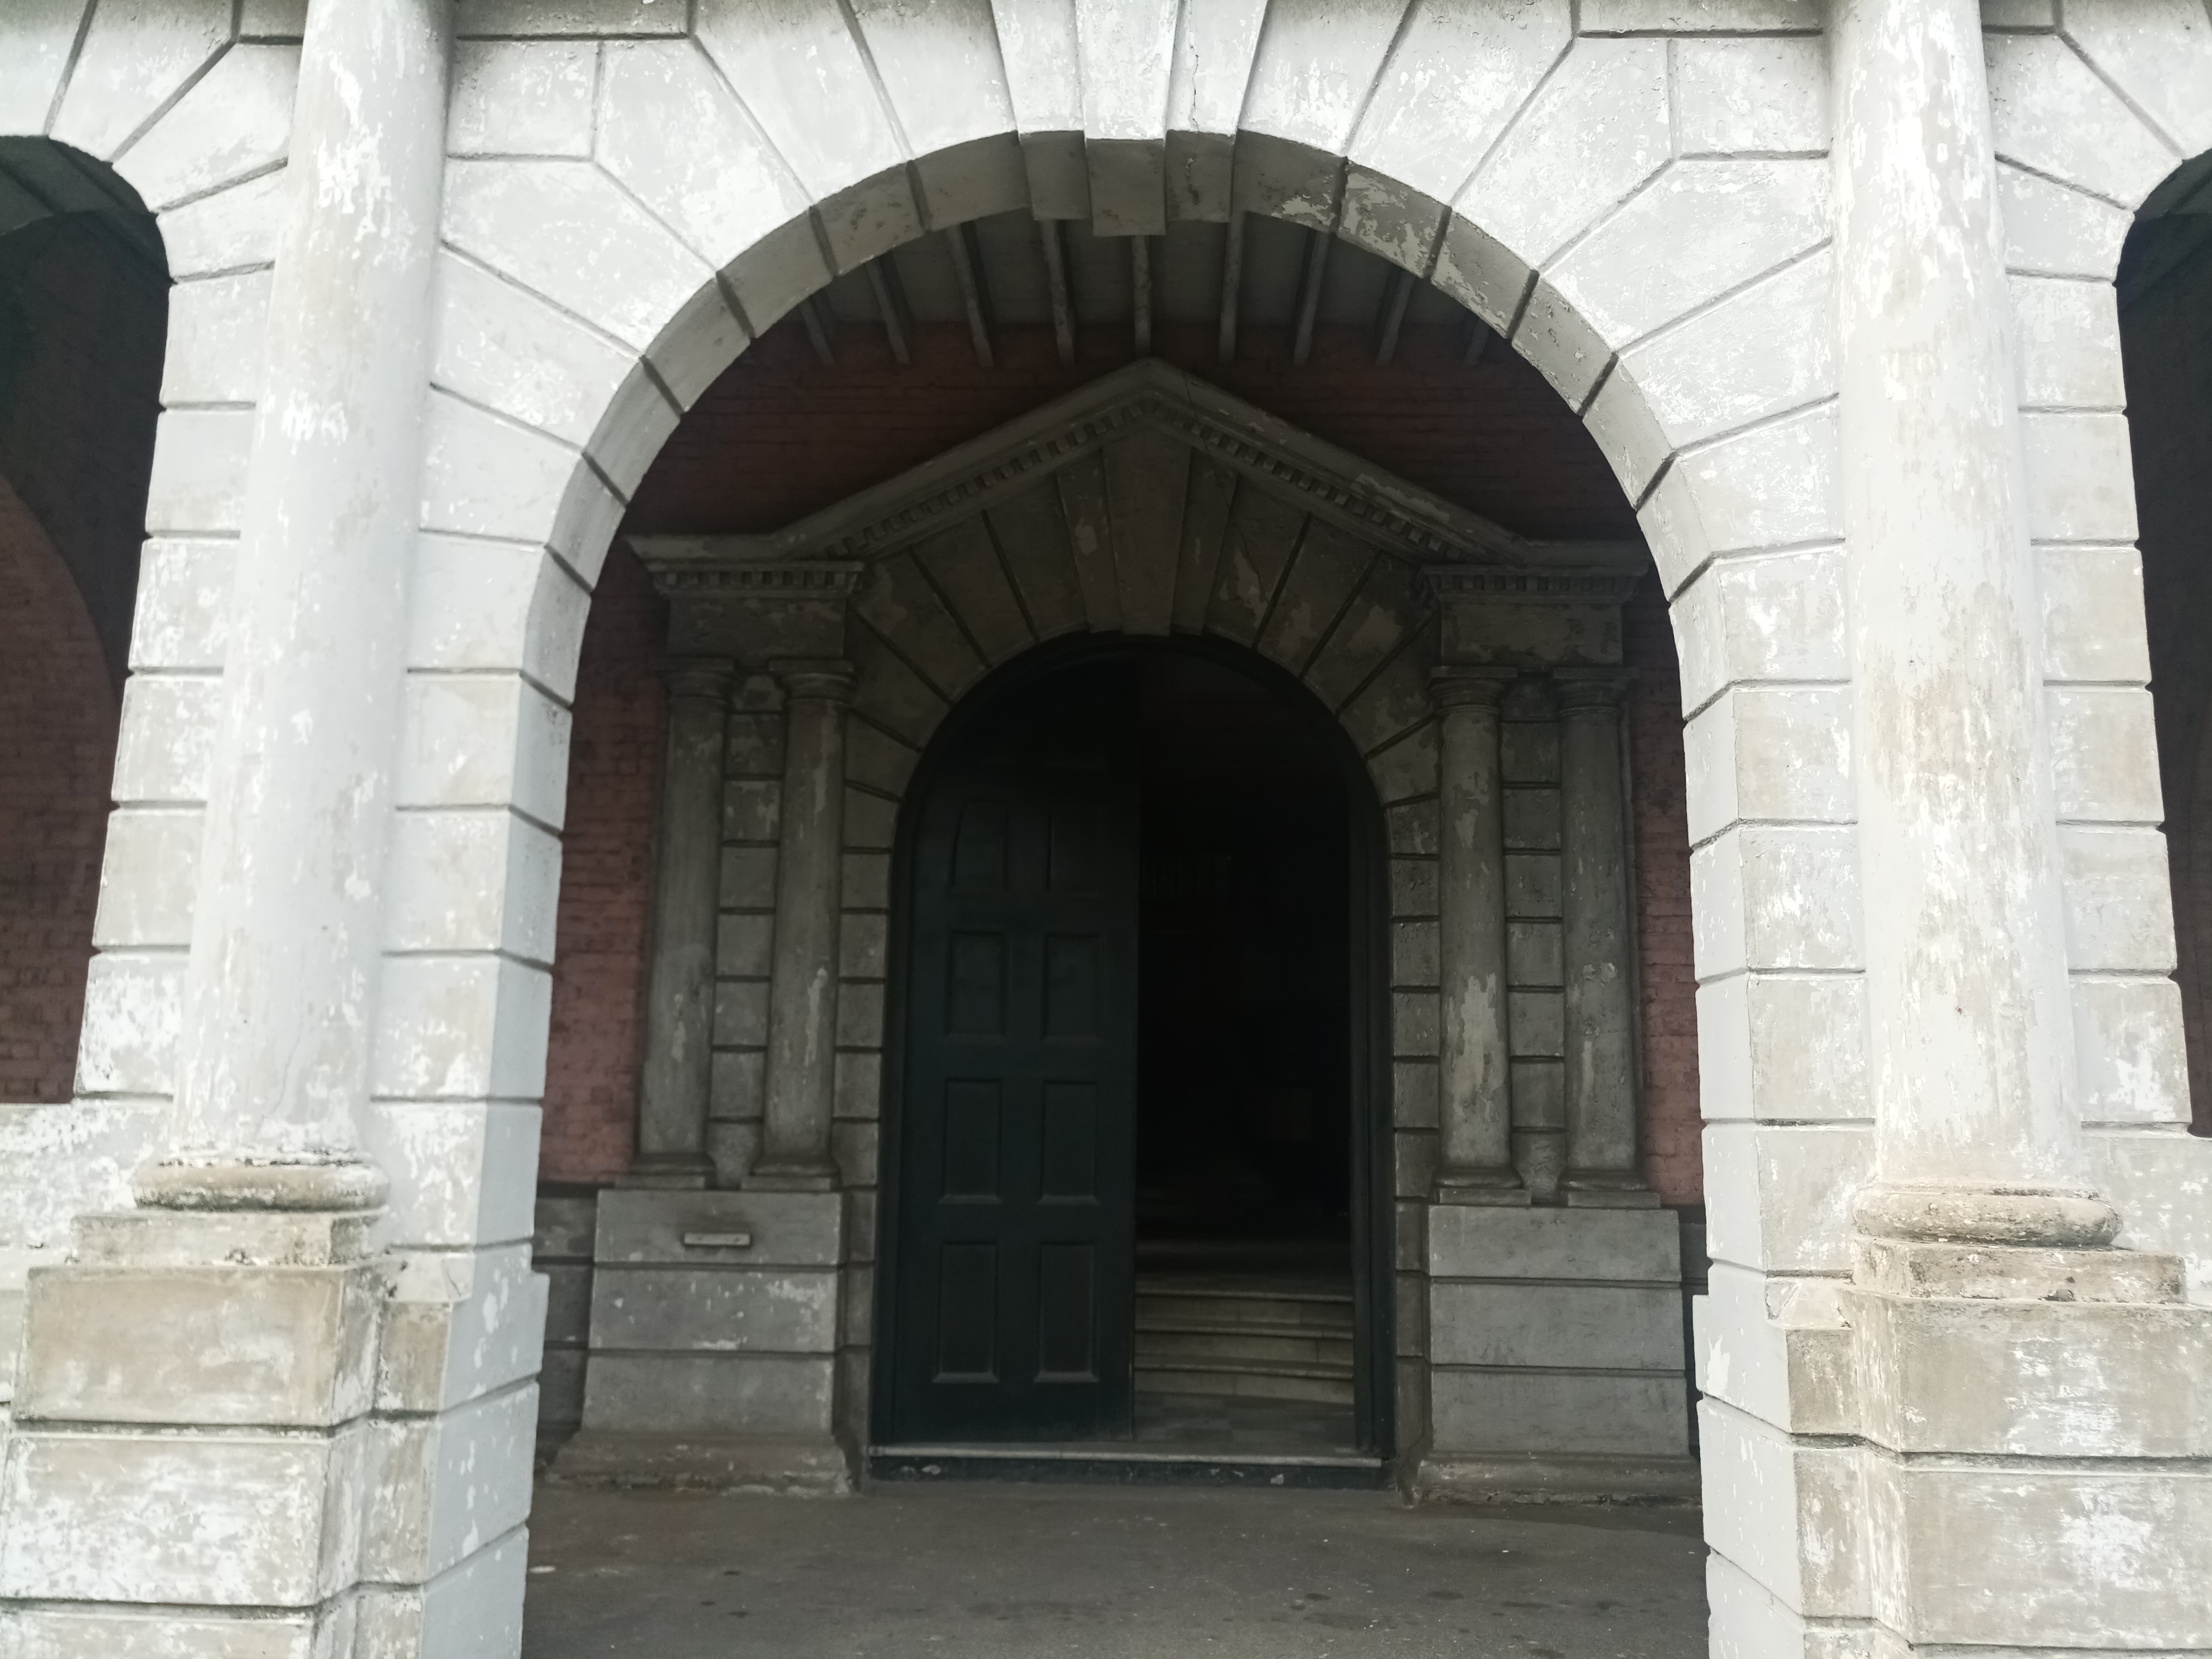 The Old Secretariat Building - Main Entry Arches